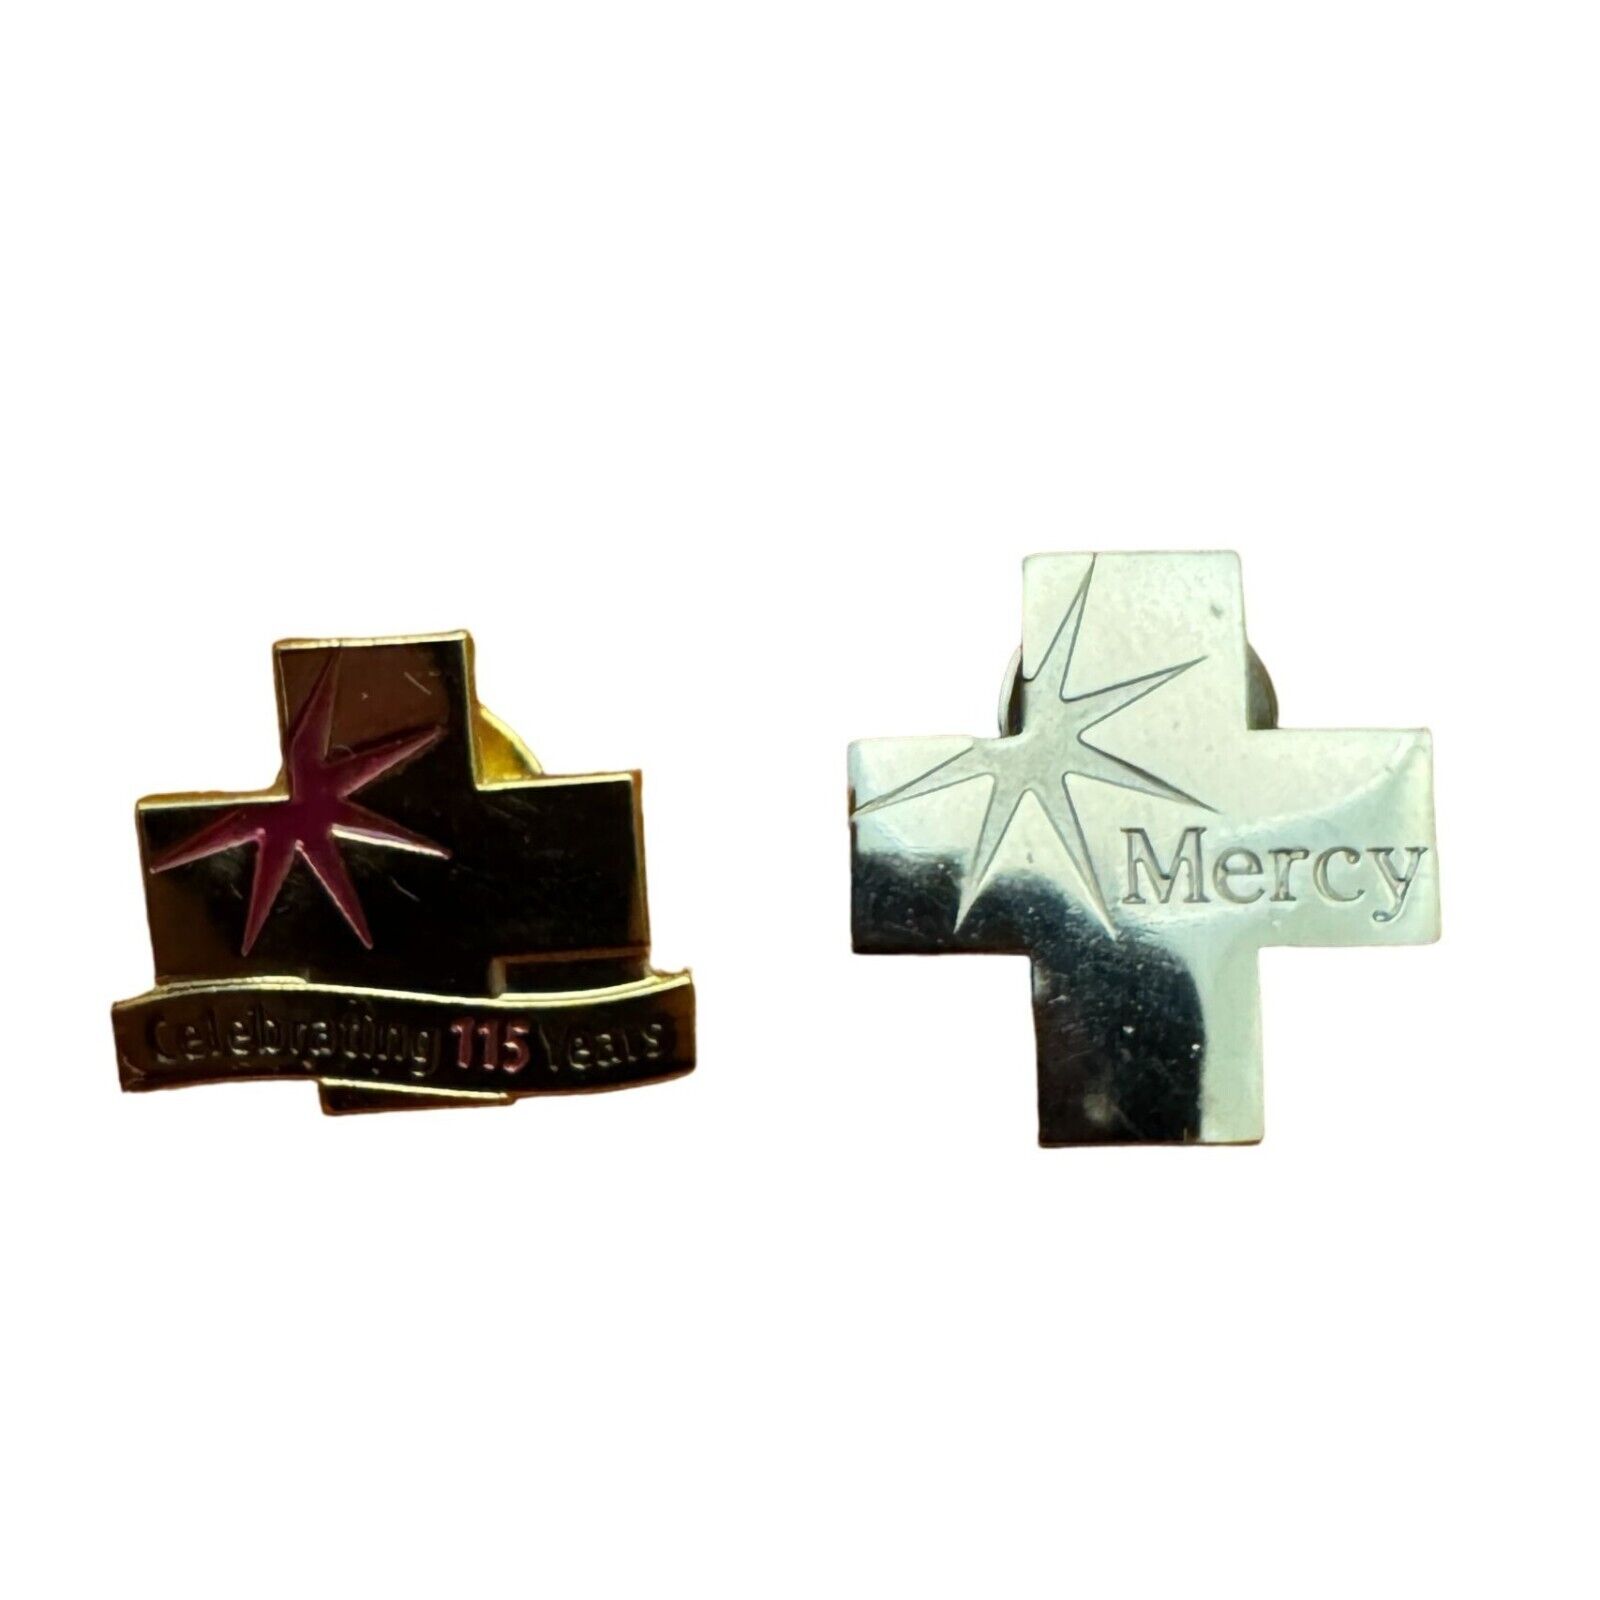 Set of 2 Mercy Hospital Pins Celebrating 115 Years and Mercy Logo Collectible